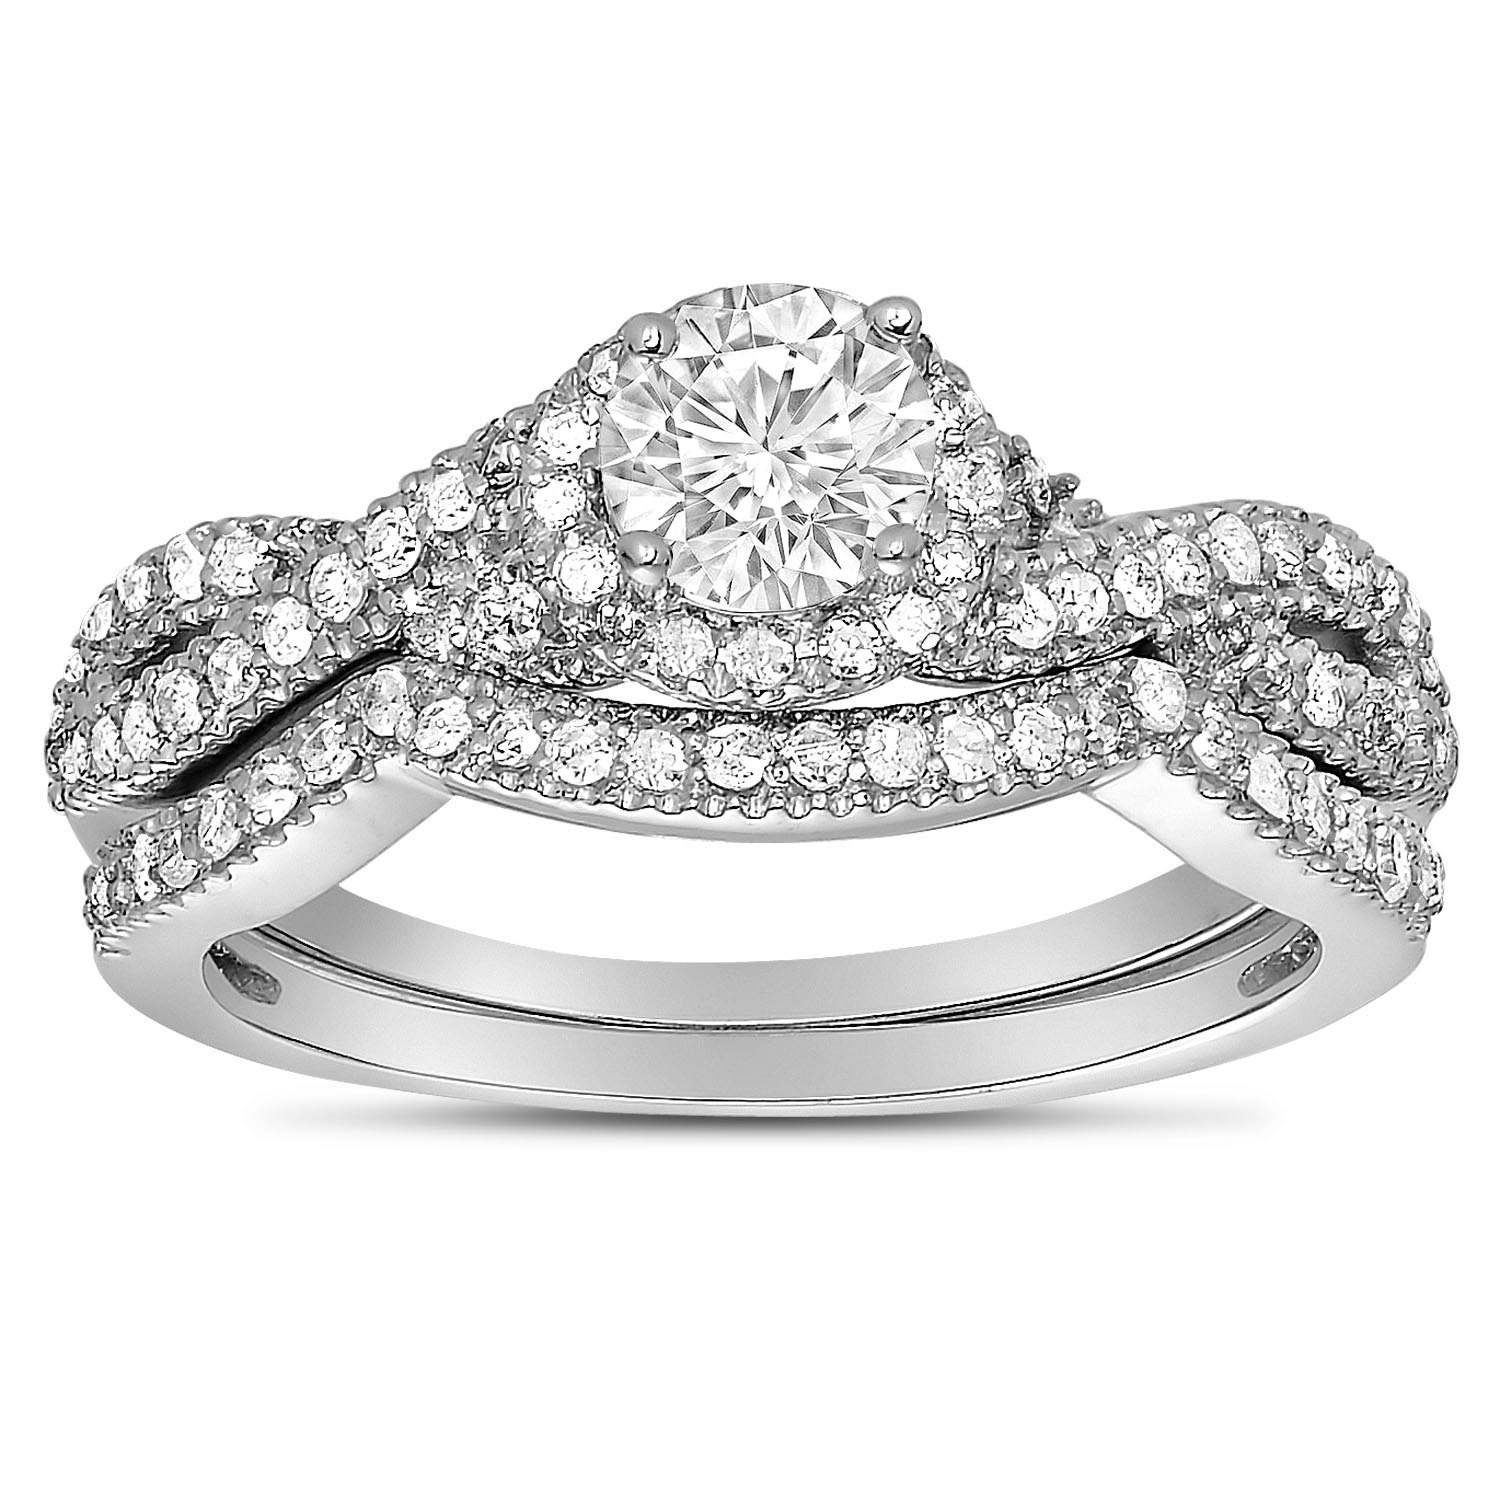 2 Carat Round Diamond Infinity Wedding Ring Set in White Gold for Her - JeenJewels